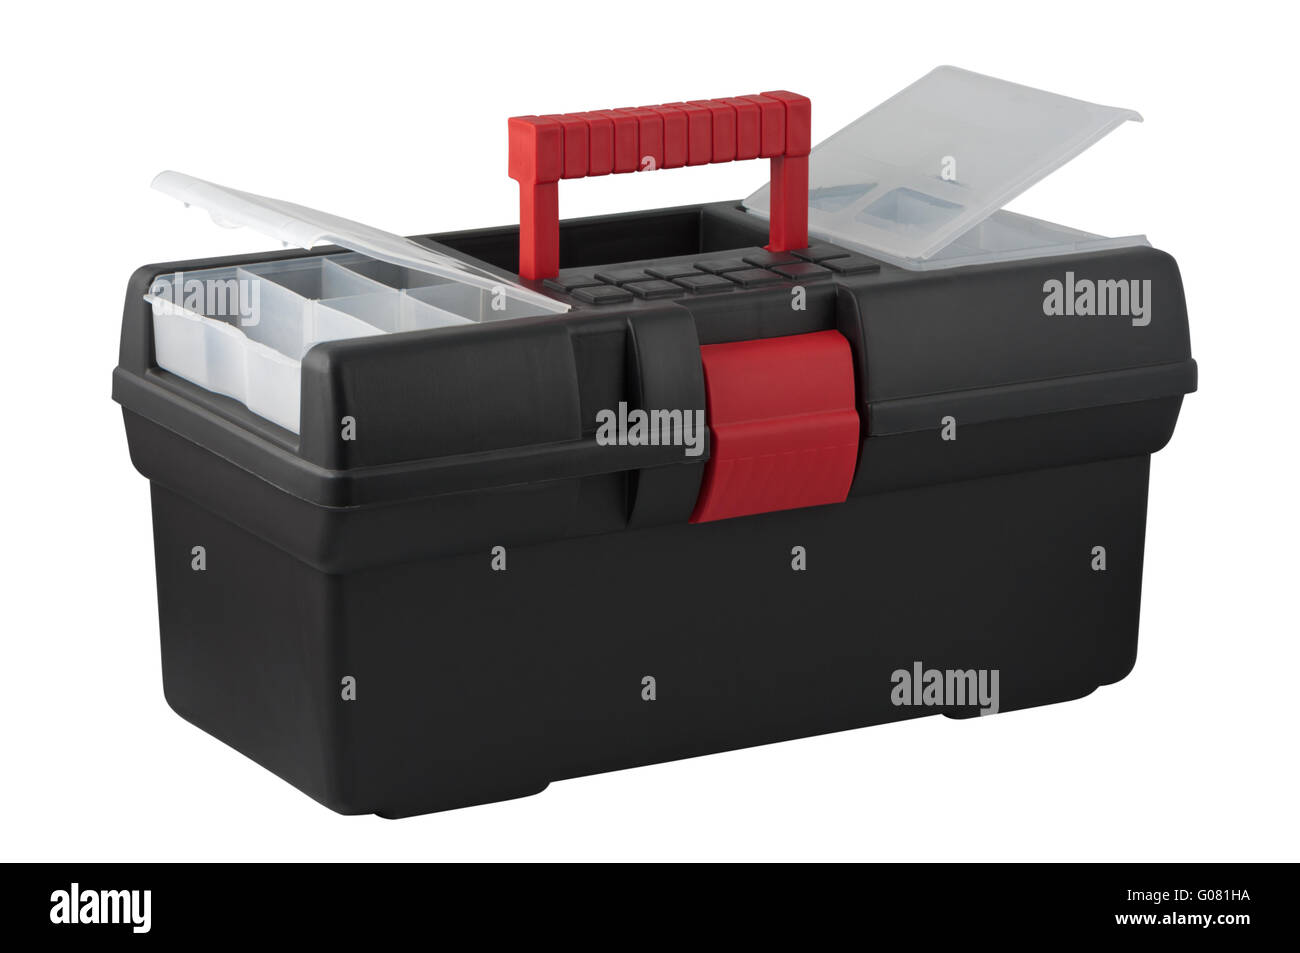 Tool box with compartments for small items in a cover. Stock Photo